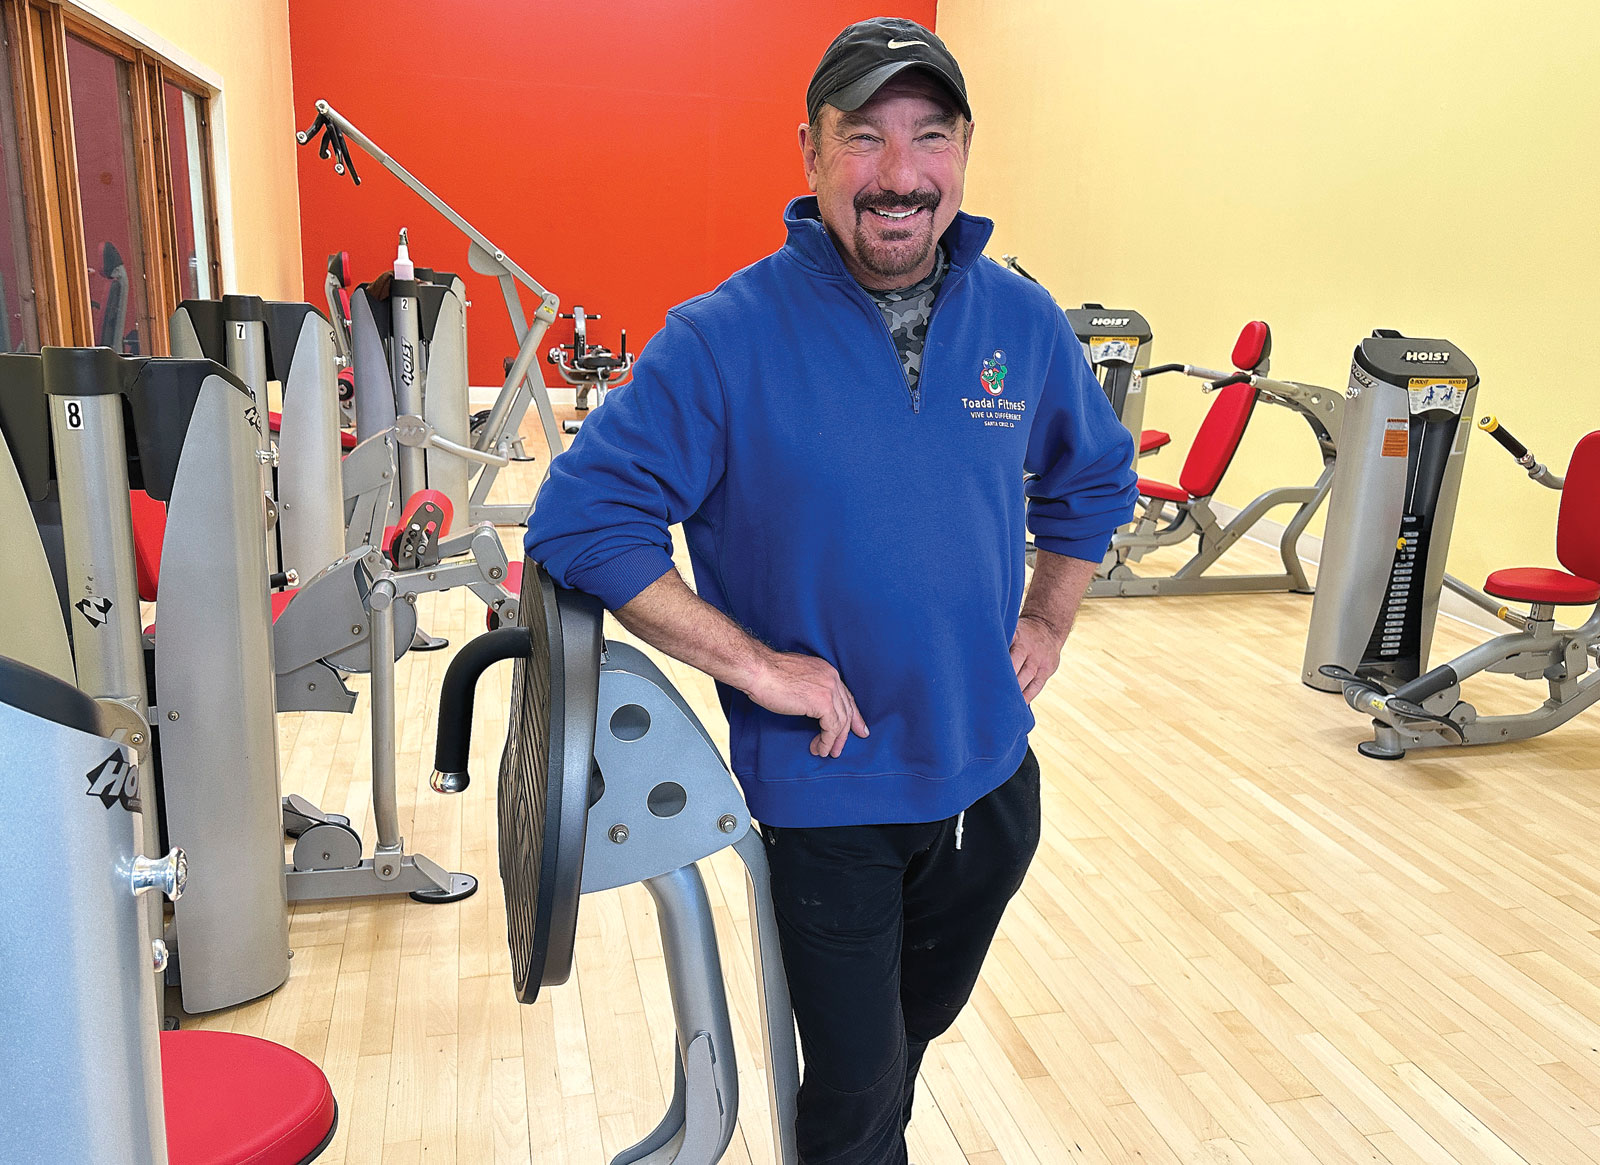 Man standing by exercise equipment in a gym